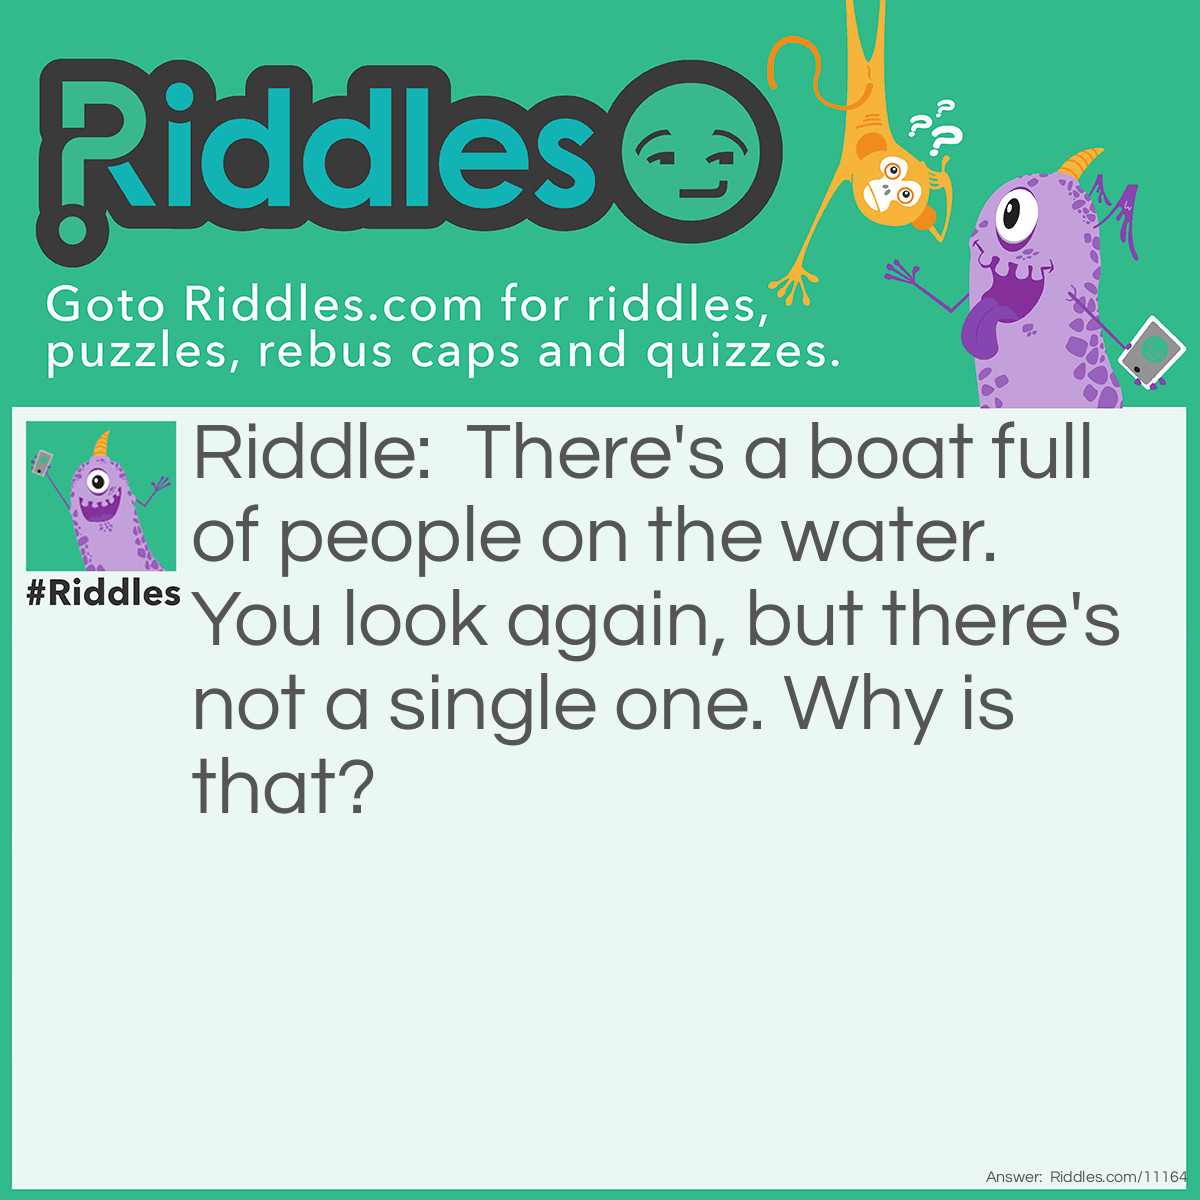 Riddle: There's a boat full of people on the water. You look again, but there's not a single one. Why is that? Answer: They're all married.